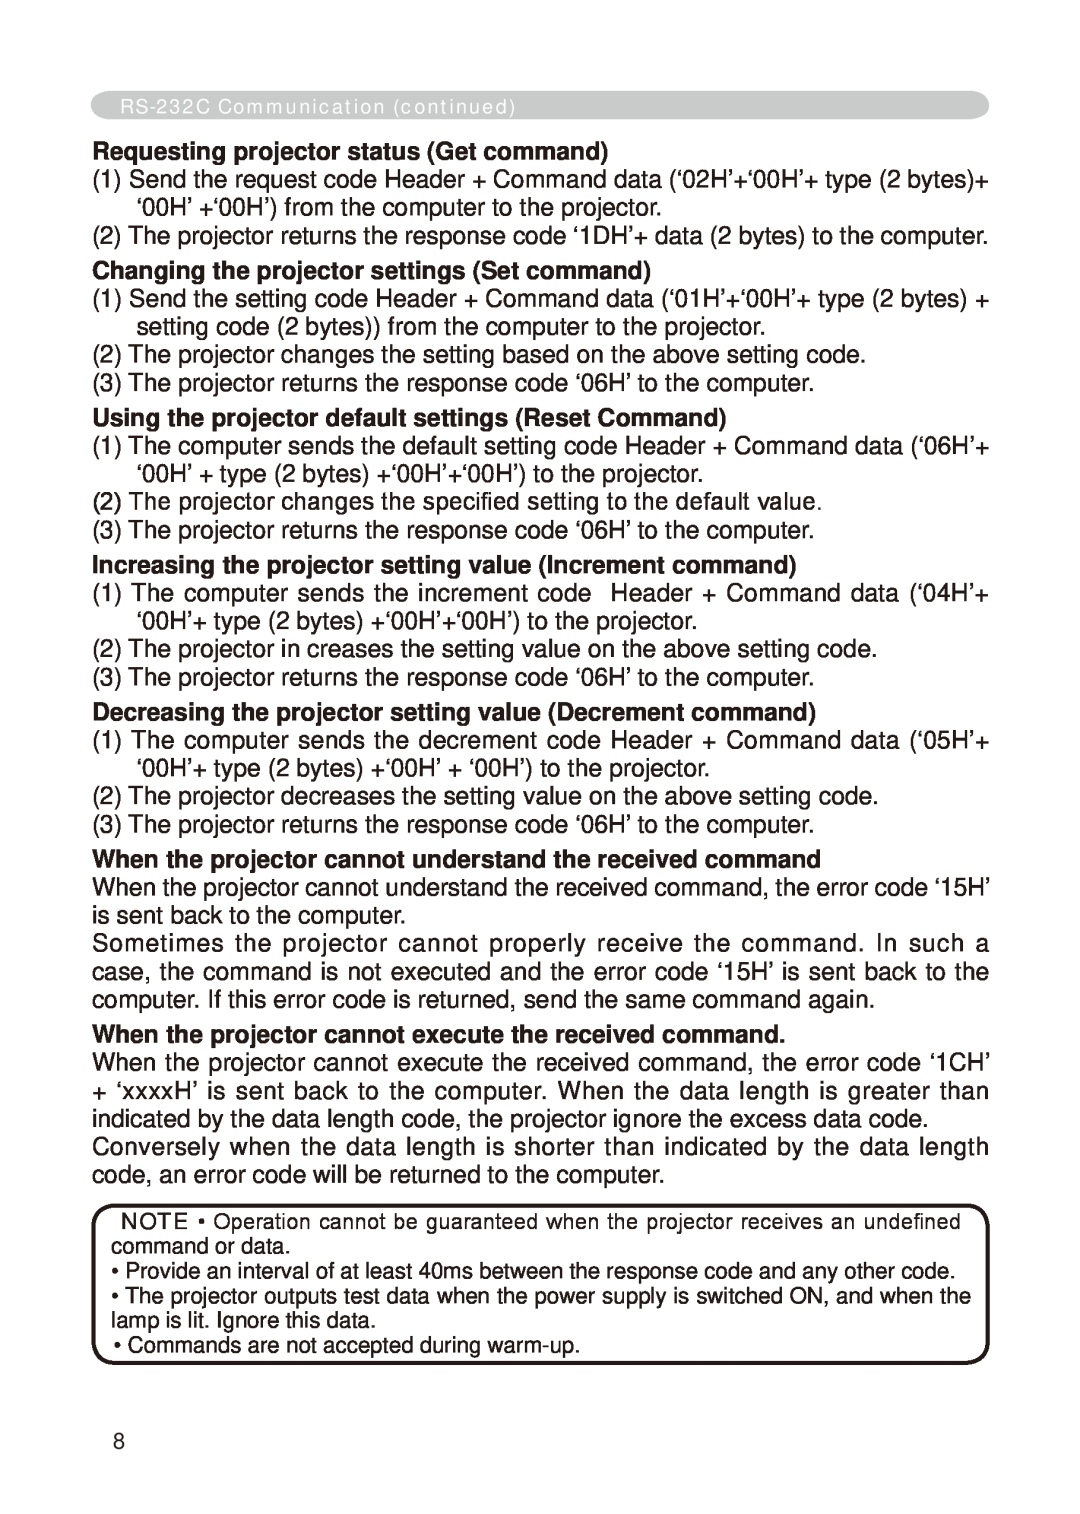 Dukane 8776-RJ, 8755E-RJ user manual Requesting projector status Get command, Changing the projector settings Set command 